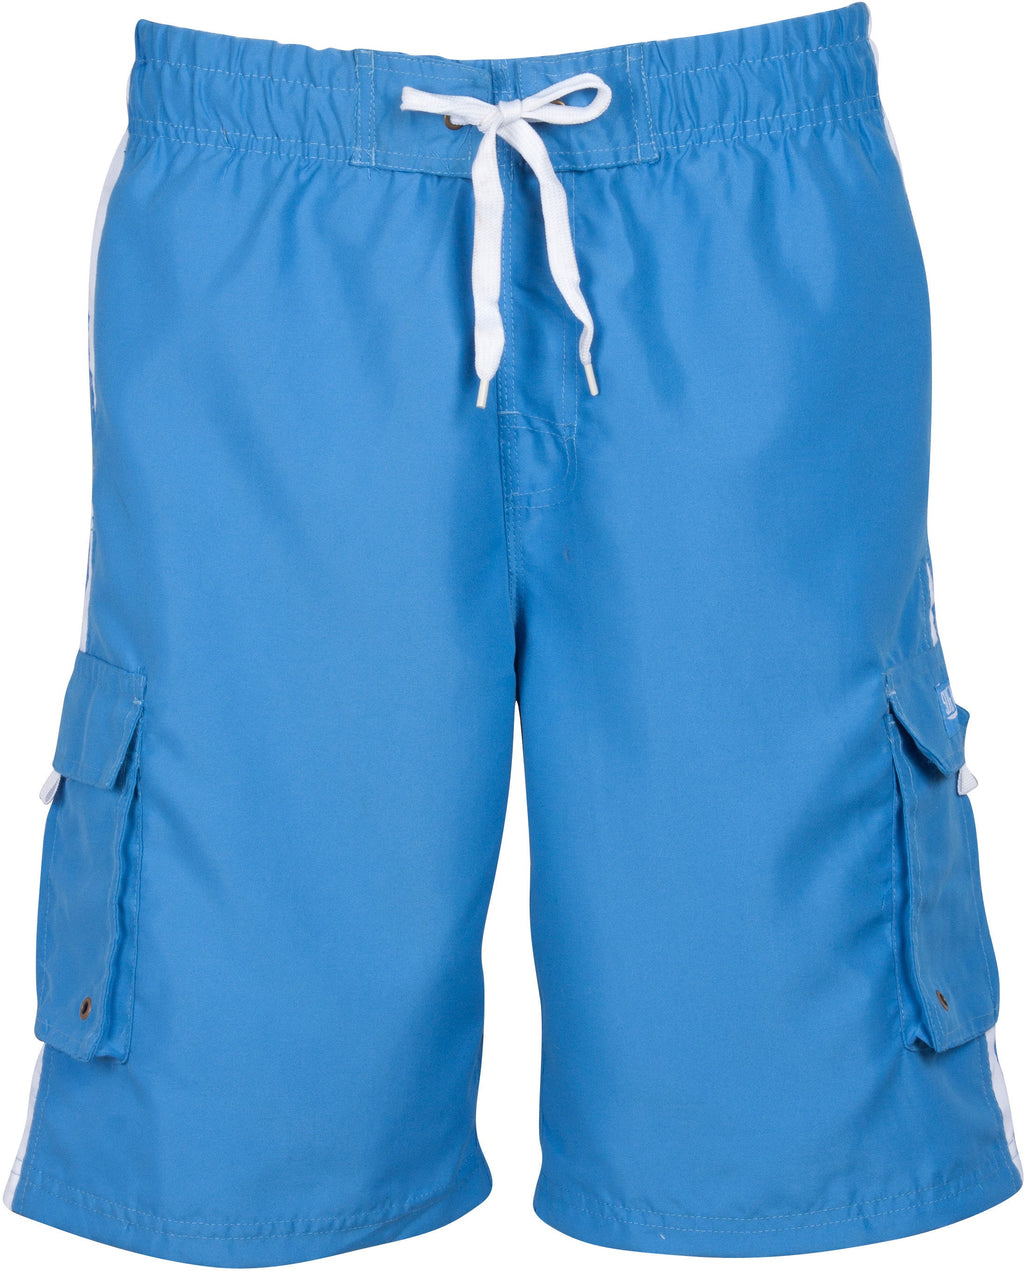 Men's Contrast Striped Solid Color Swim Trunks for Surfing and Skating